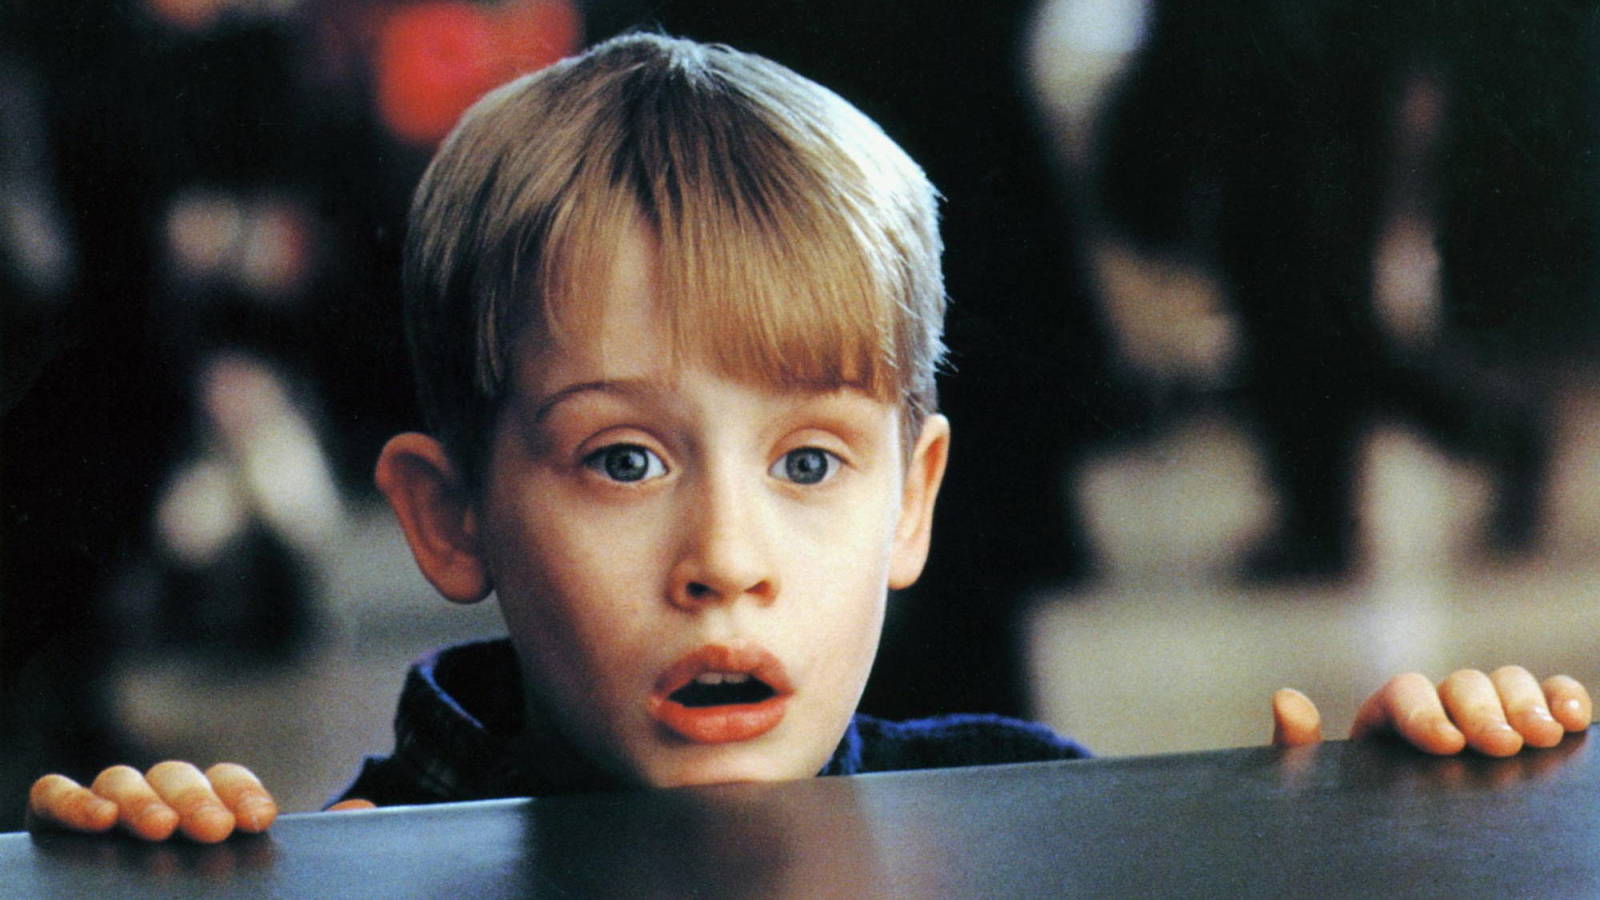 Home Alone 3 (1997) Cast and Crew